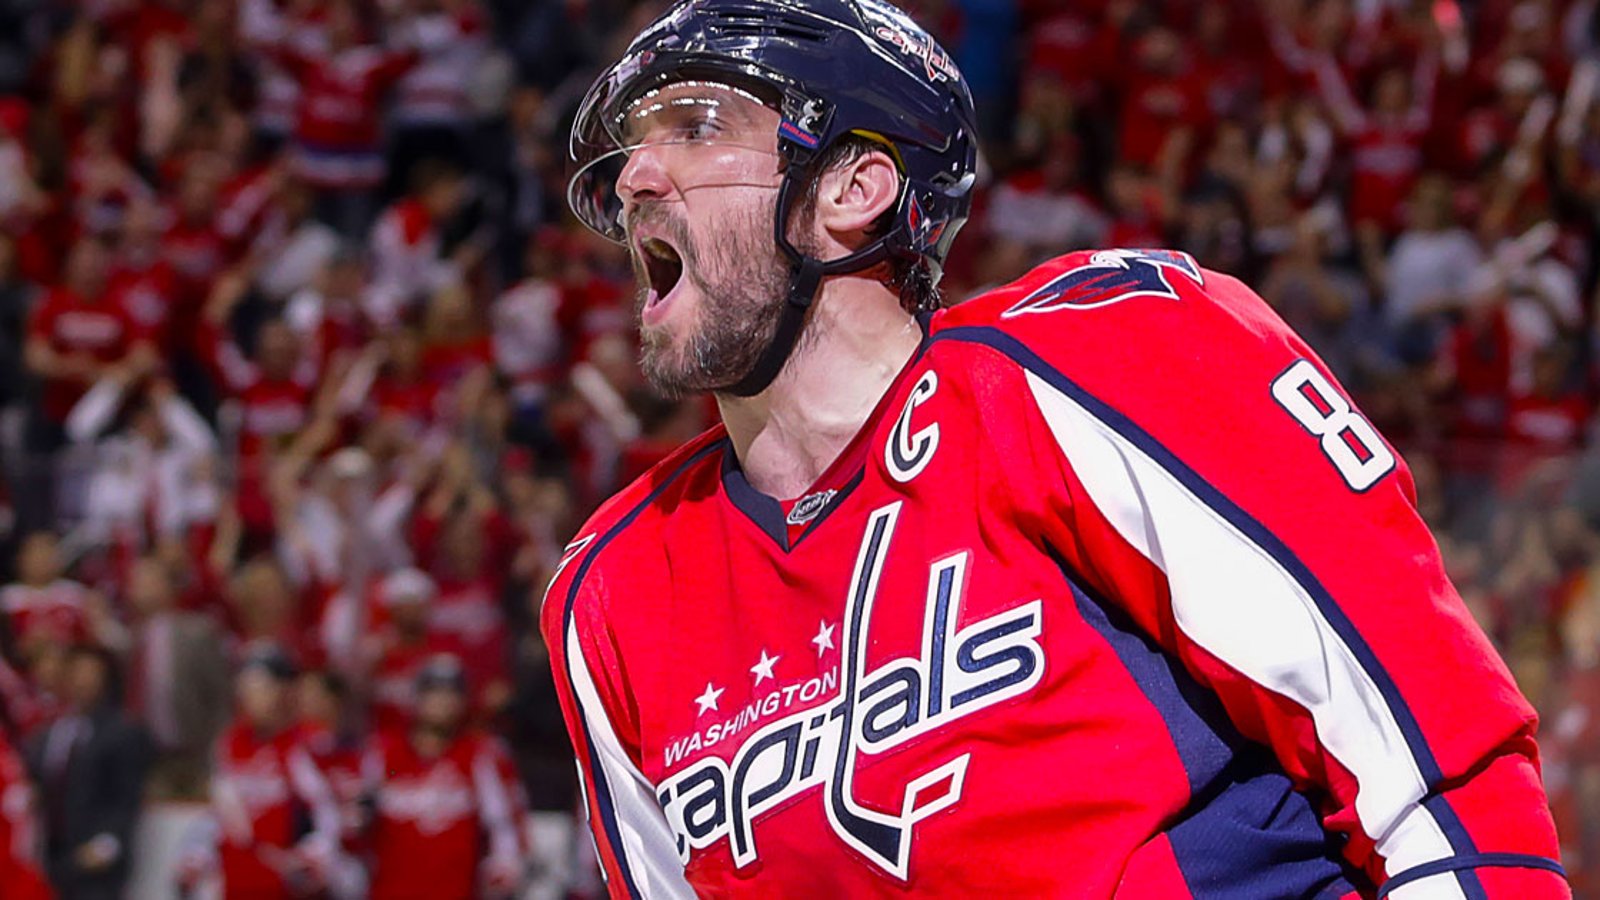 Alex Ovechkin gives an amazing gift to a homeless man